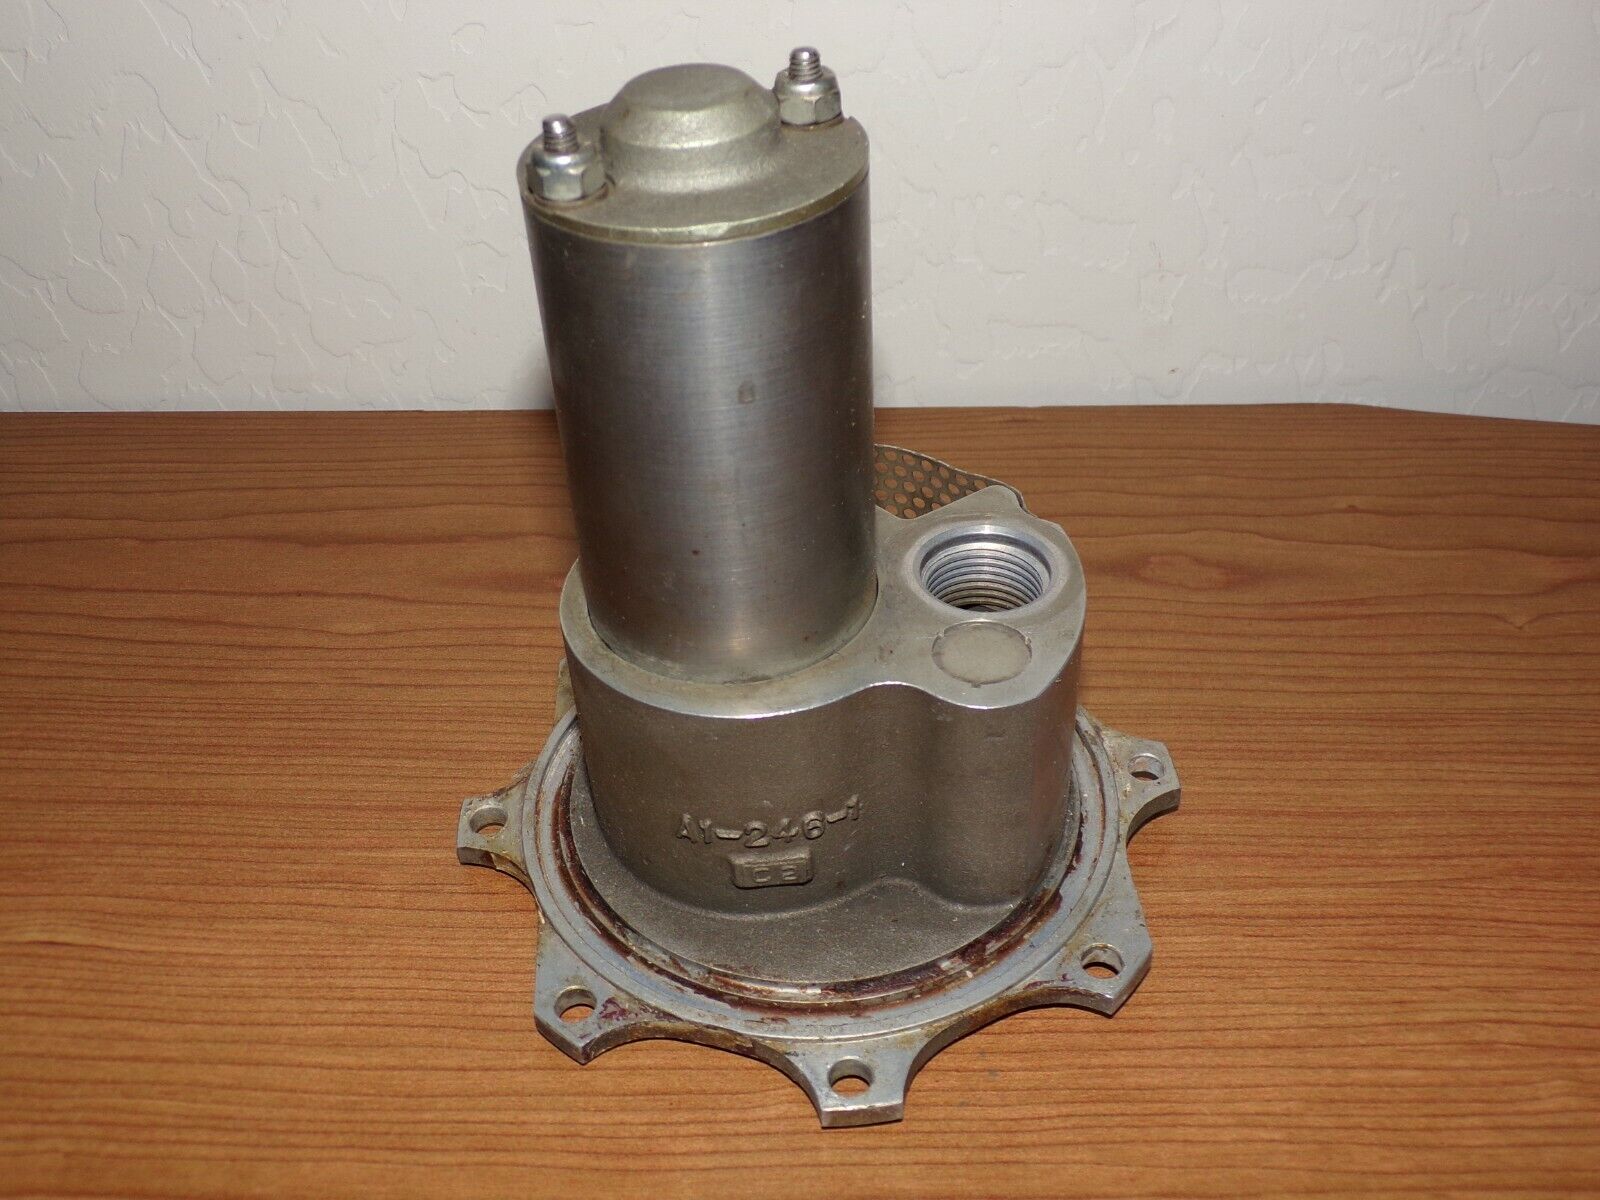 Bell Helicopter Boost Pump 206-062-673-1 Airborne 1C35-1 and 1C27-4